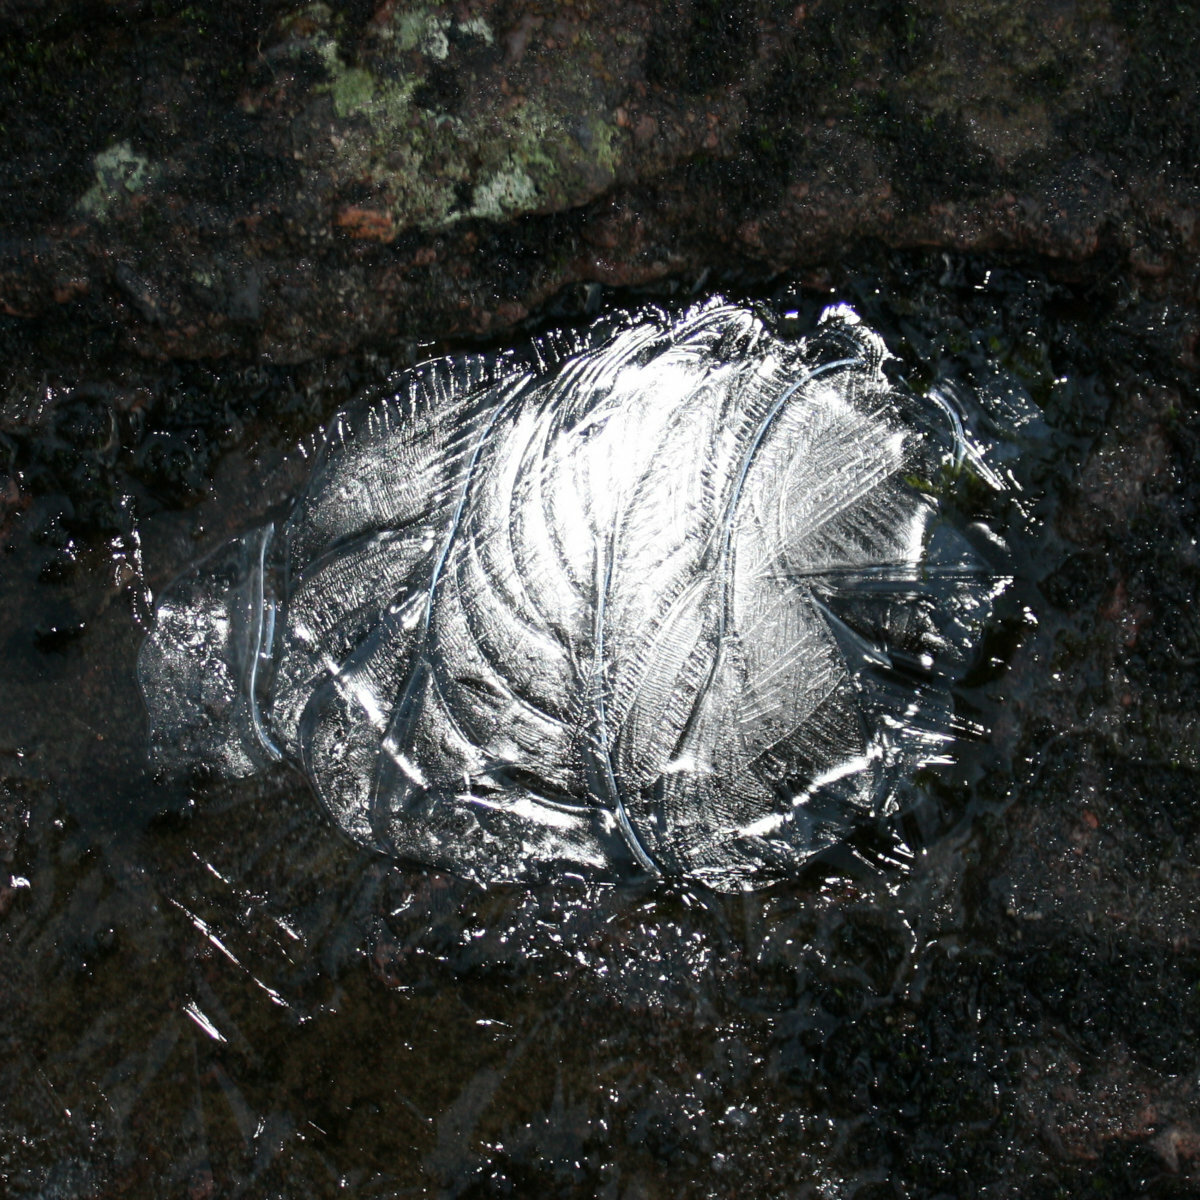 Darkness surrounds a reflective surface, possibly ice, which shows the markings of leaves and natural debris.